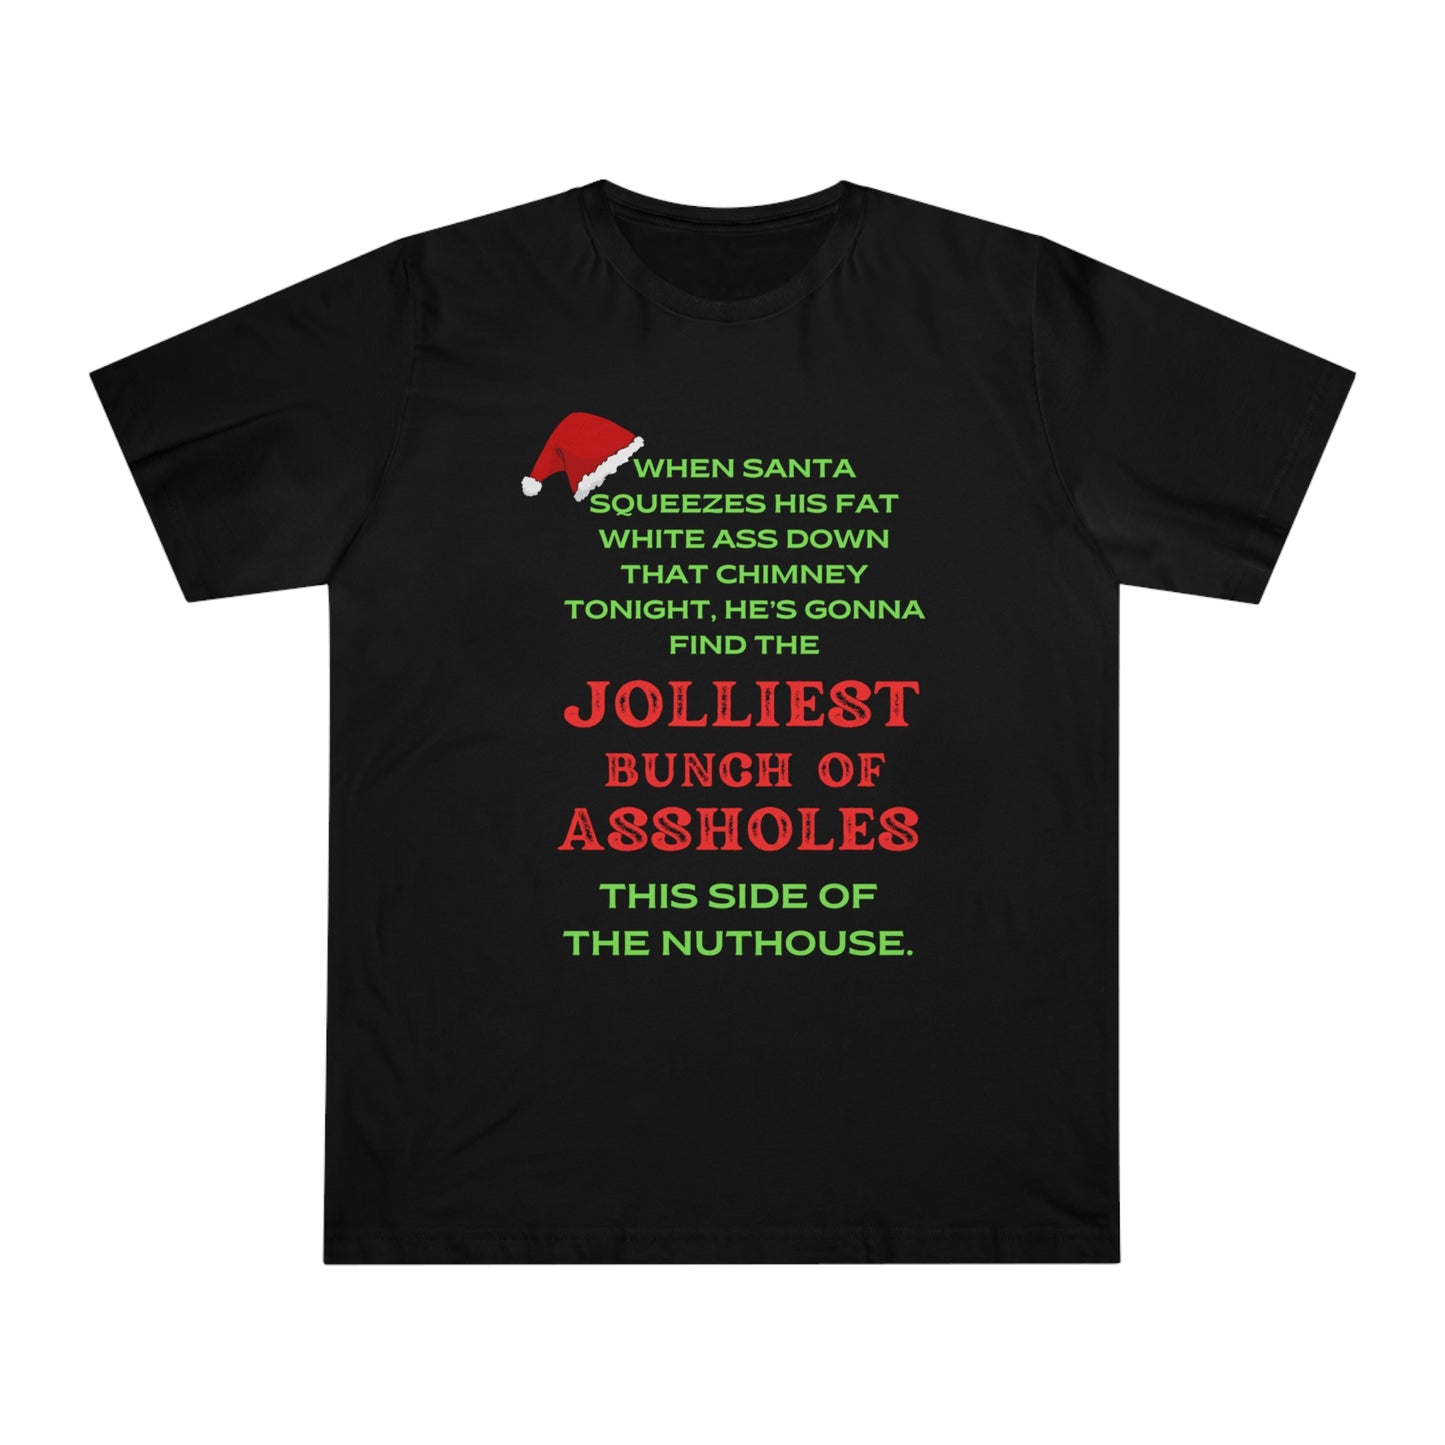 Jolliest Bunch of Assholes Christmas T-Shirt - Hilarious Holiday Gift for Nutty Families